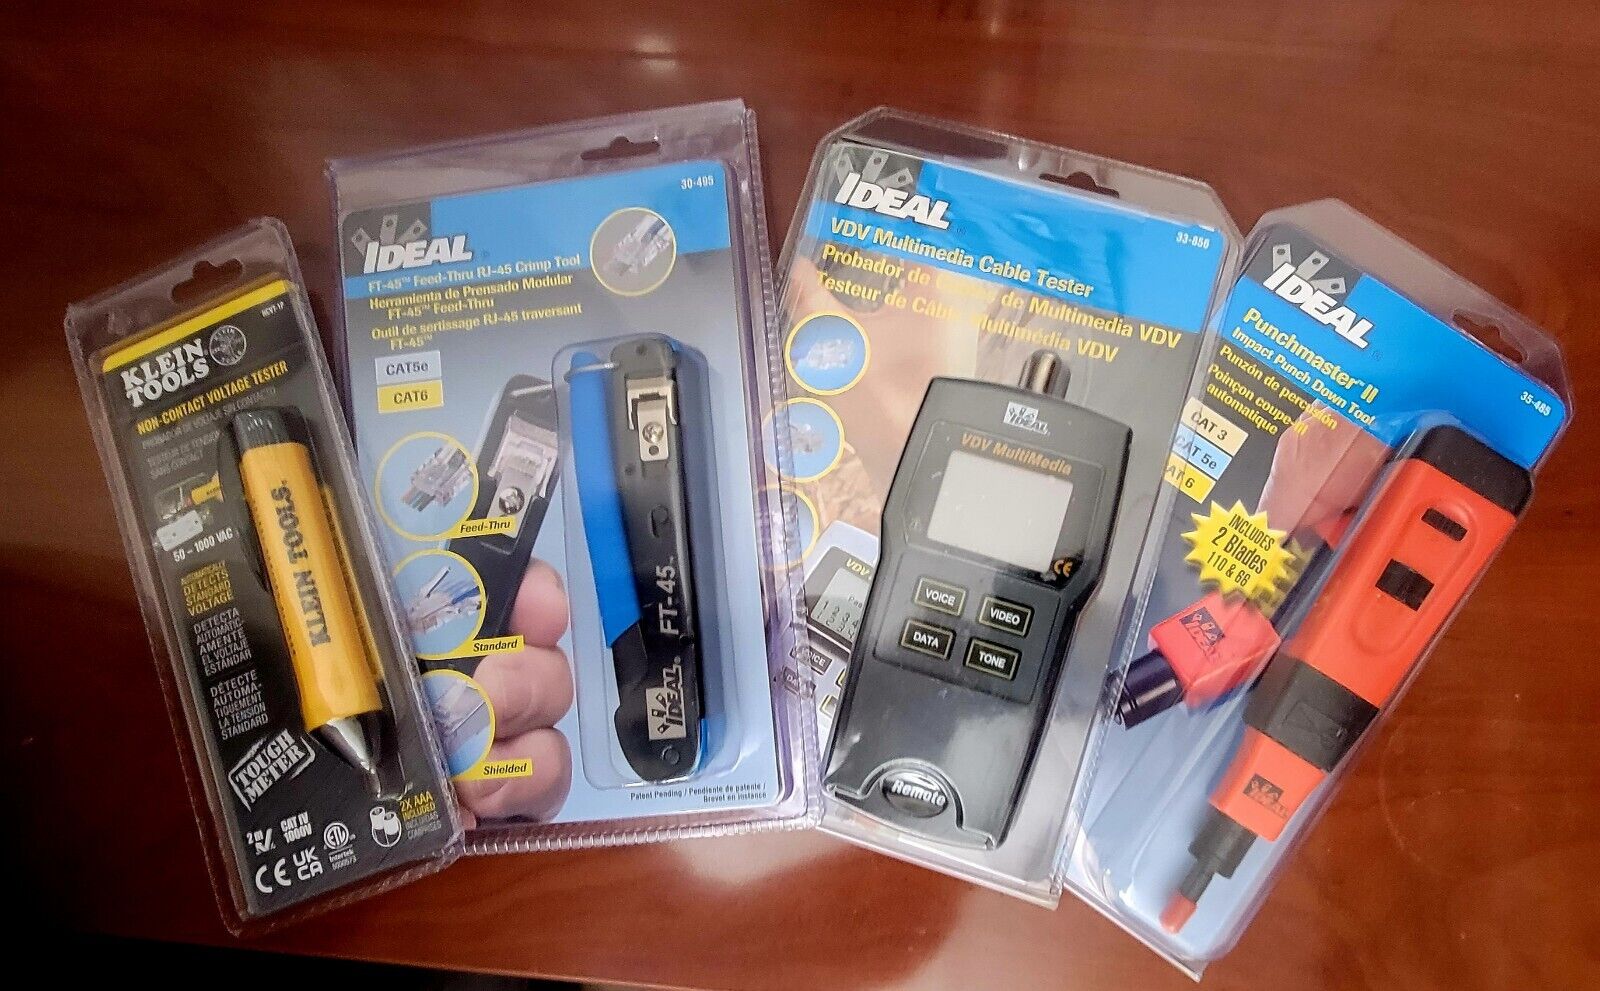 Cable Tester, Punchmaster II, RJ-45 Crimp Tool w/free Volt Tester & Zippered Bag